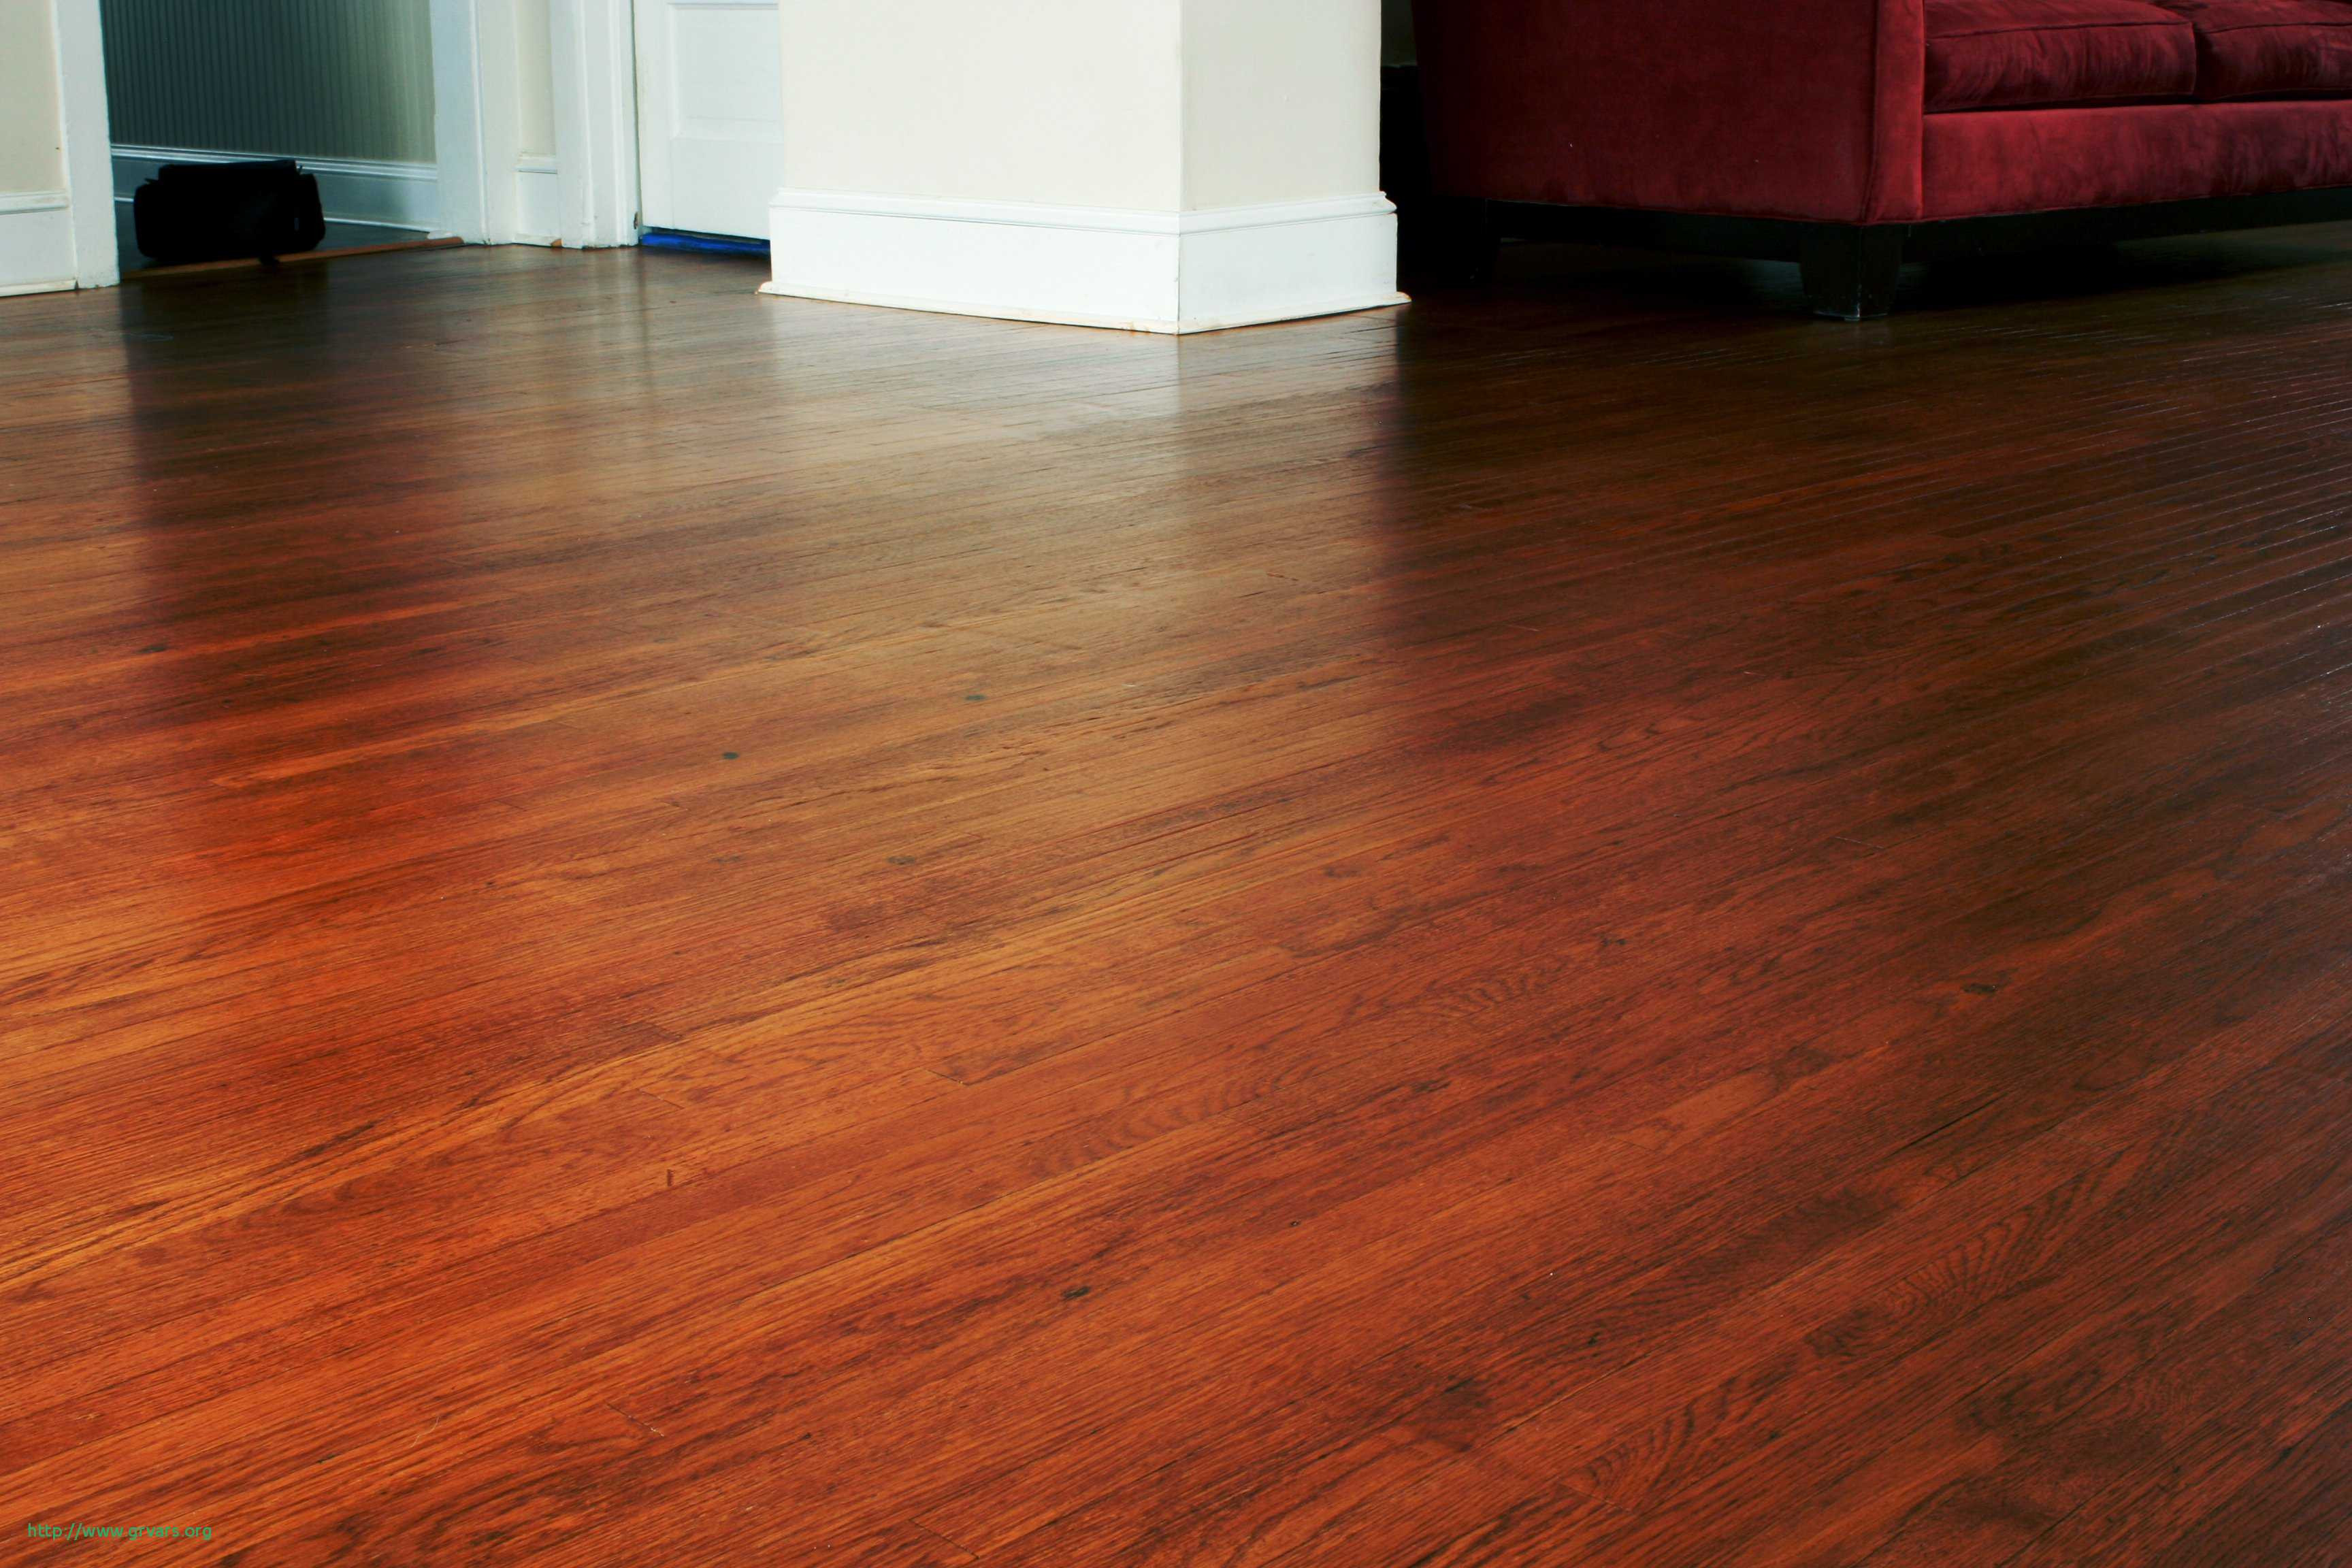 10 Perfect How to Repair Water Damaged Hardwood Floors 2024 free download how to repair water damaged hardwood floors of 15 nouveau how to fix wood floors from water damage ideas blog with sloping floors how to diagnose and repair sloping floors homeadvisor from h